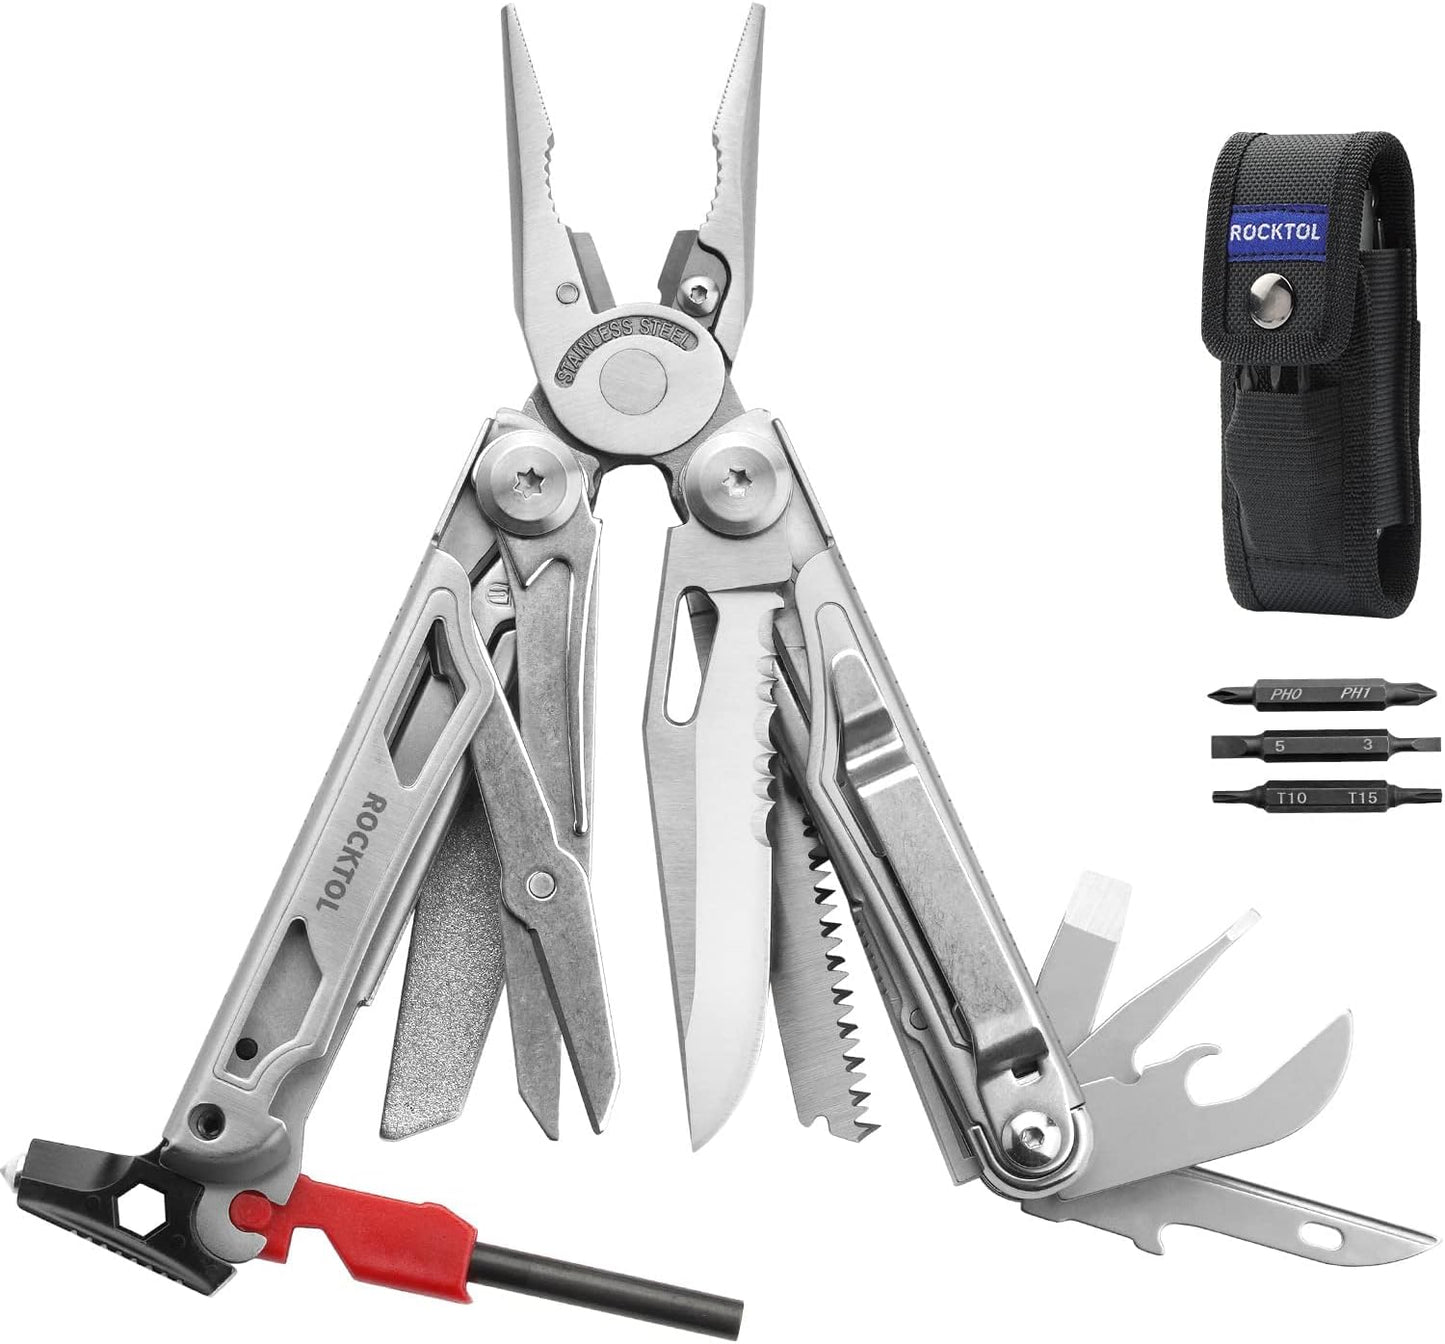 ROCKTOL Multitool, 22-in-1 Camping Multitool Pliers with Fire Starter Emergency, Whistle, Glass Breaker, Safety Locking and Nylon Sheath for Survival, Camping, Hunting, Hiking